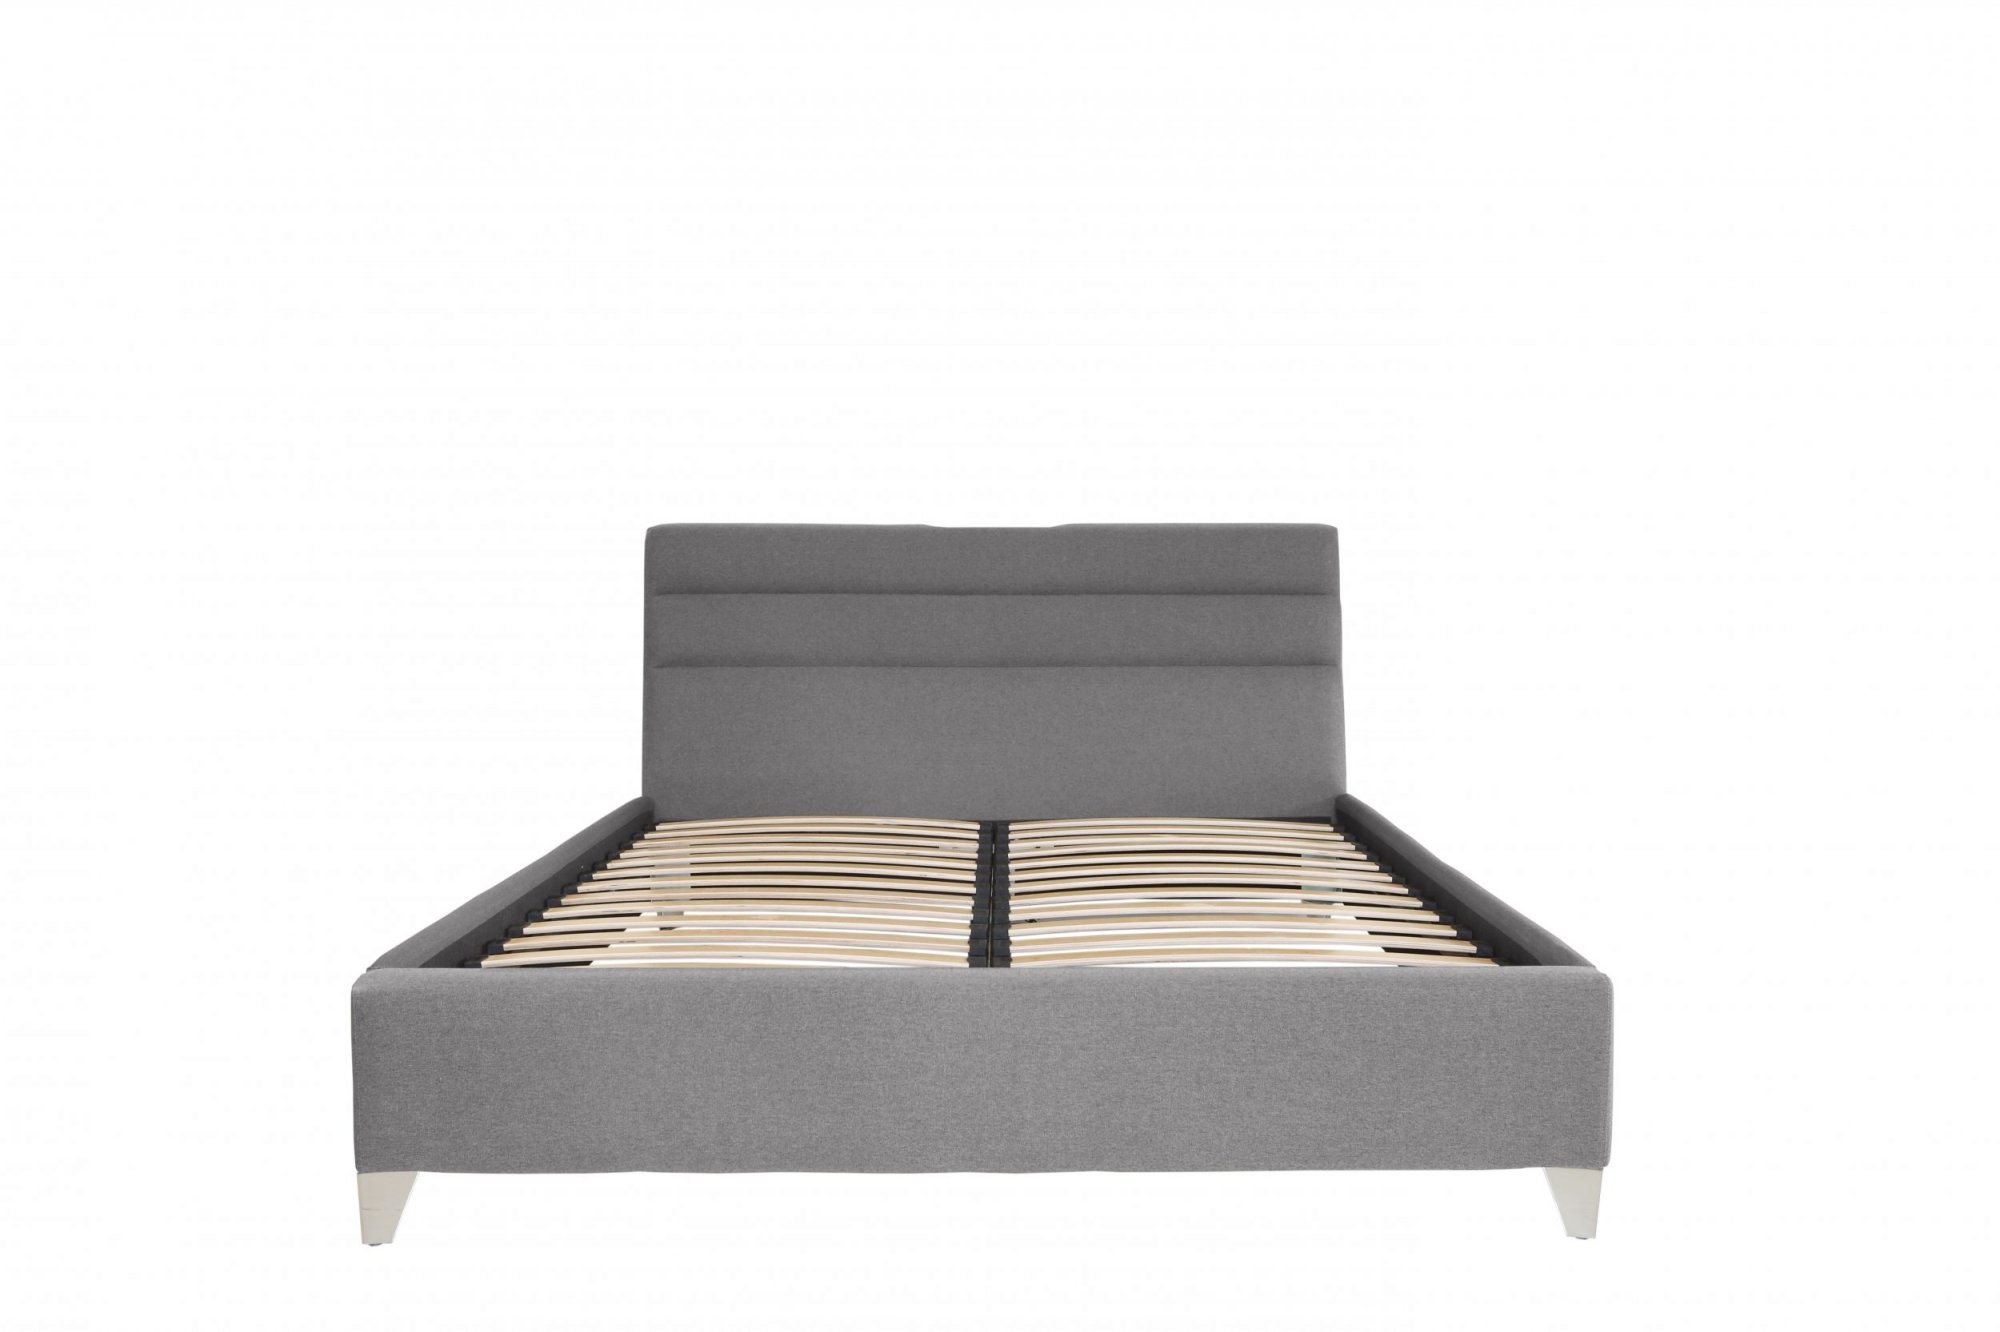 Tempur Genoa Bedstead | Low Price Promise | Claytons Carpets Lincoln